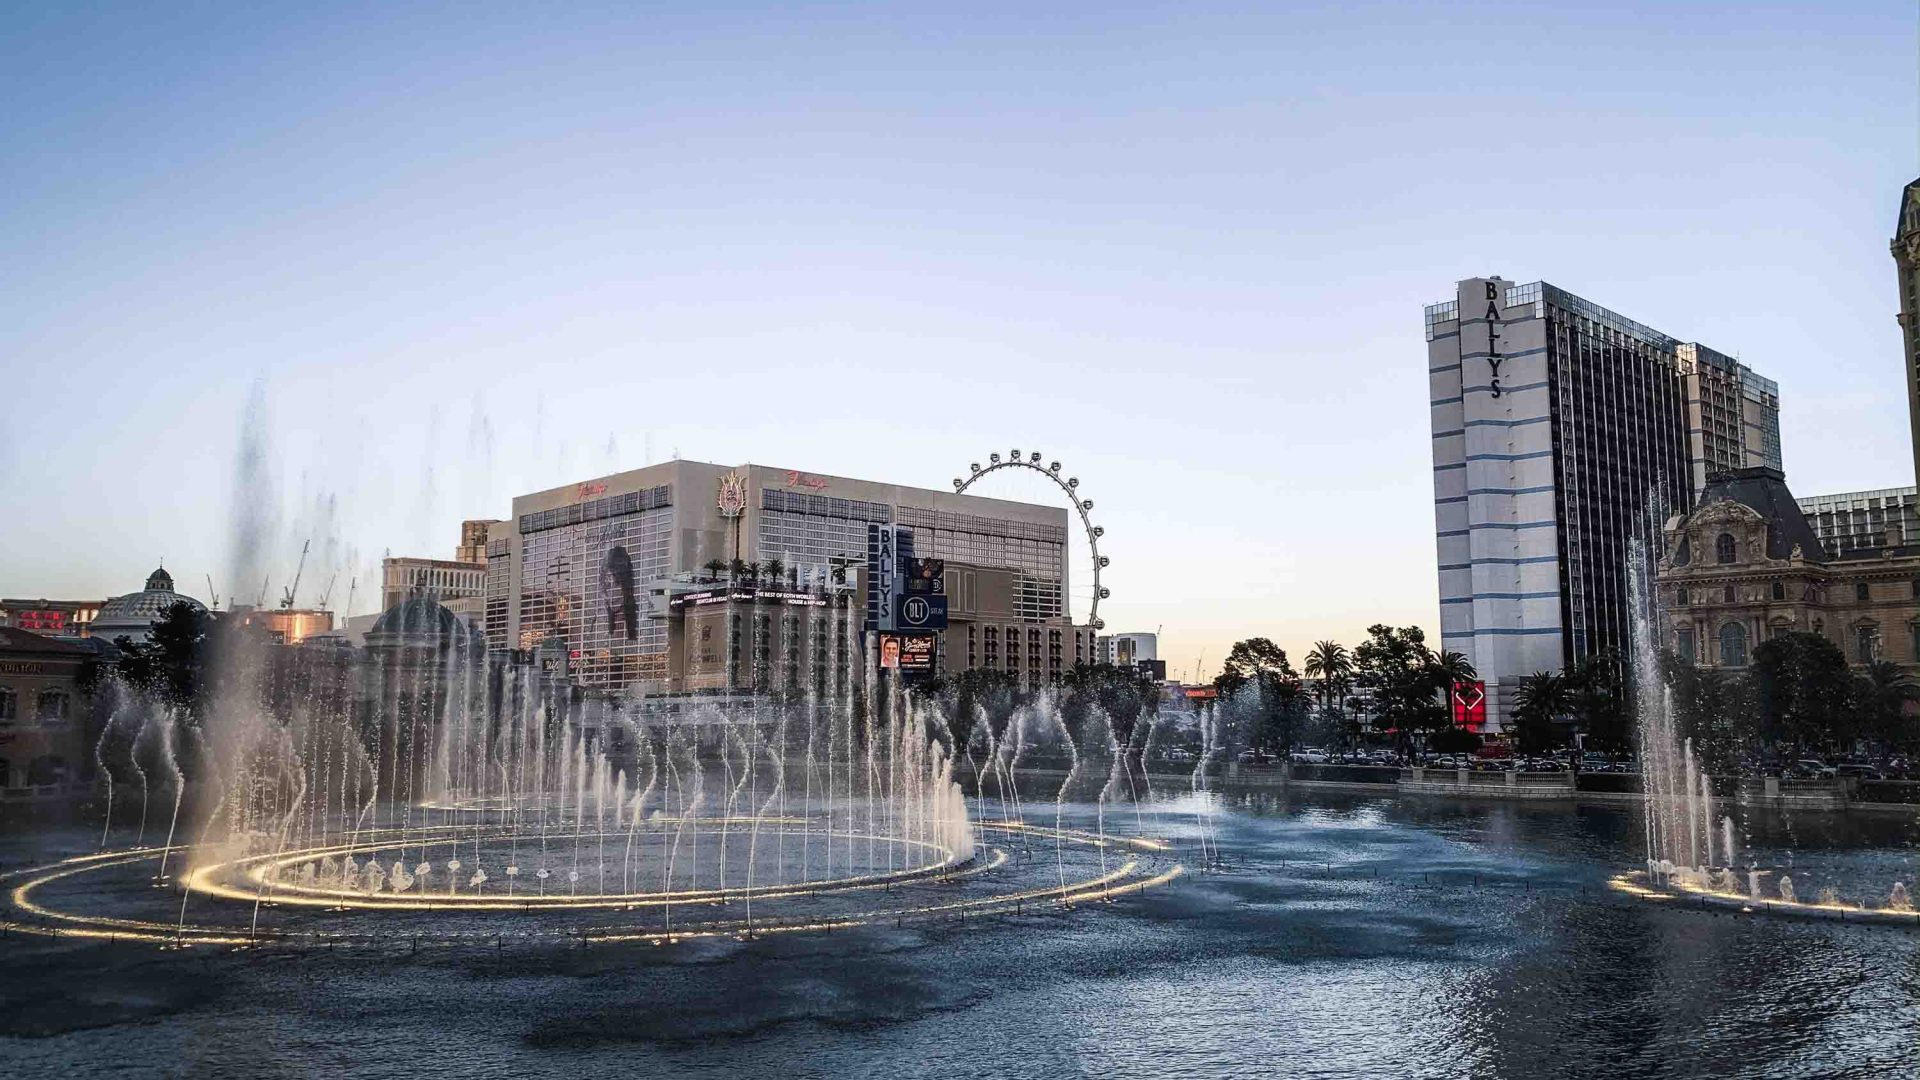 A large, modern hotel in Vegas with a circular water fountain in the foreground.